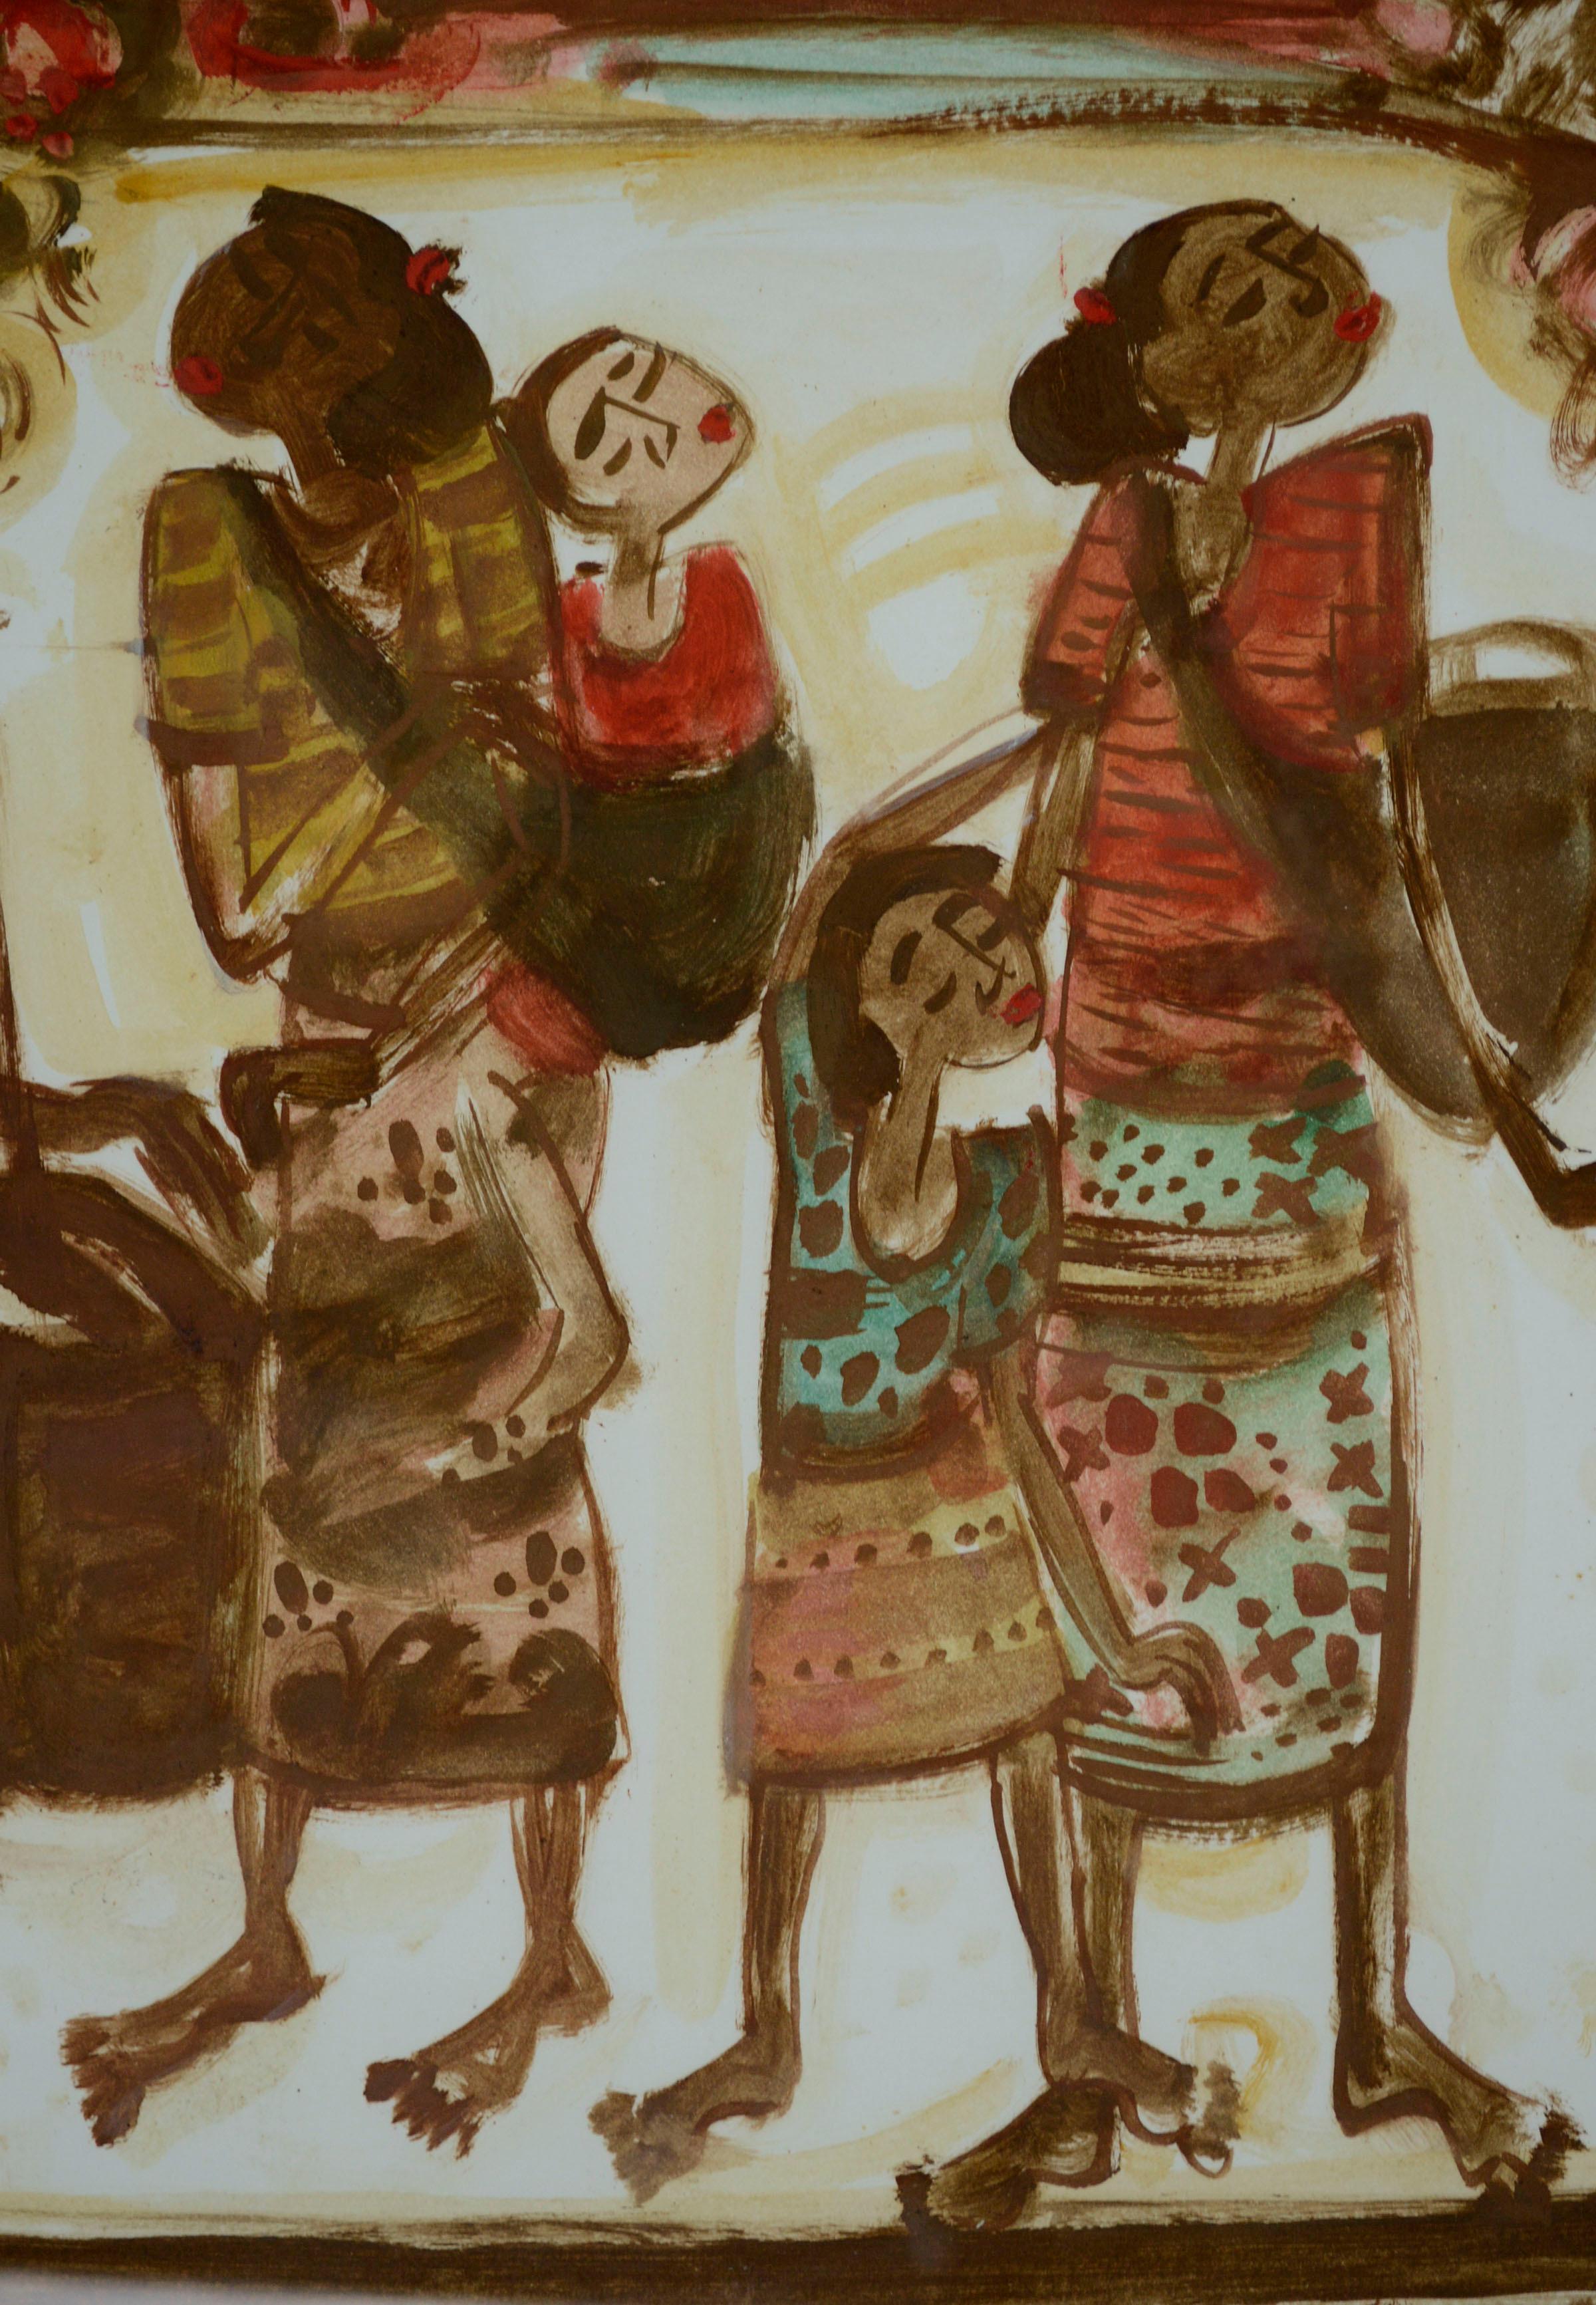 Figurative gouache painting on paper of four barefoot women dressed in tribal patterned garments carrying baskets and children, by an unknown artist (20th Century). Singed and dated indistinctly lower left corner. Displayed in a giltwood frame with